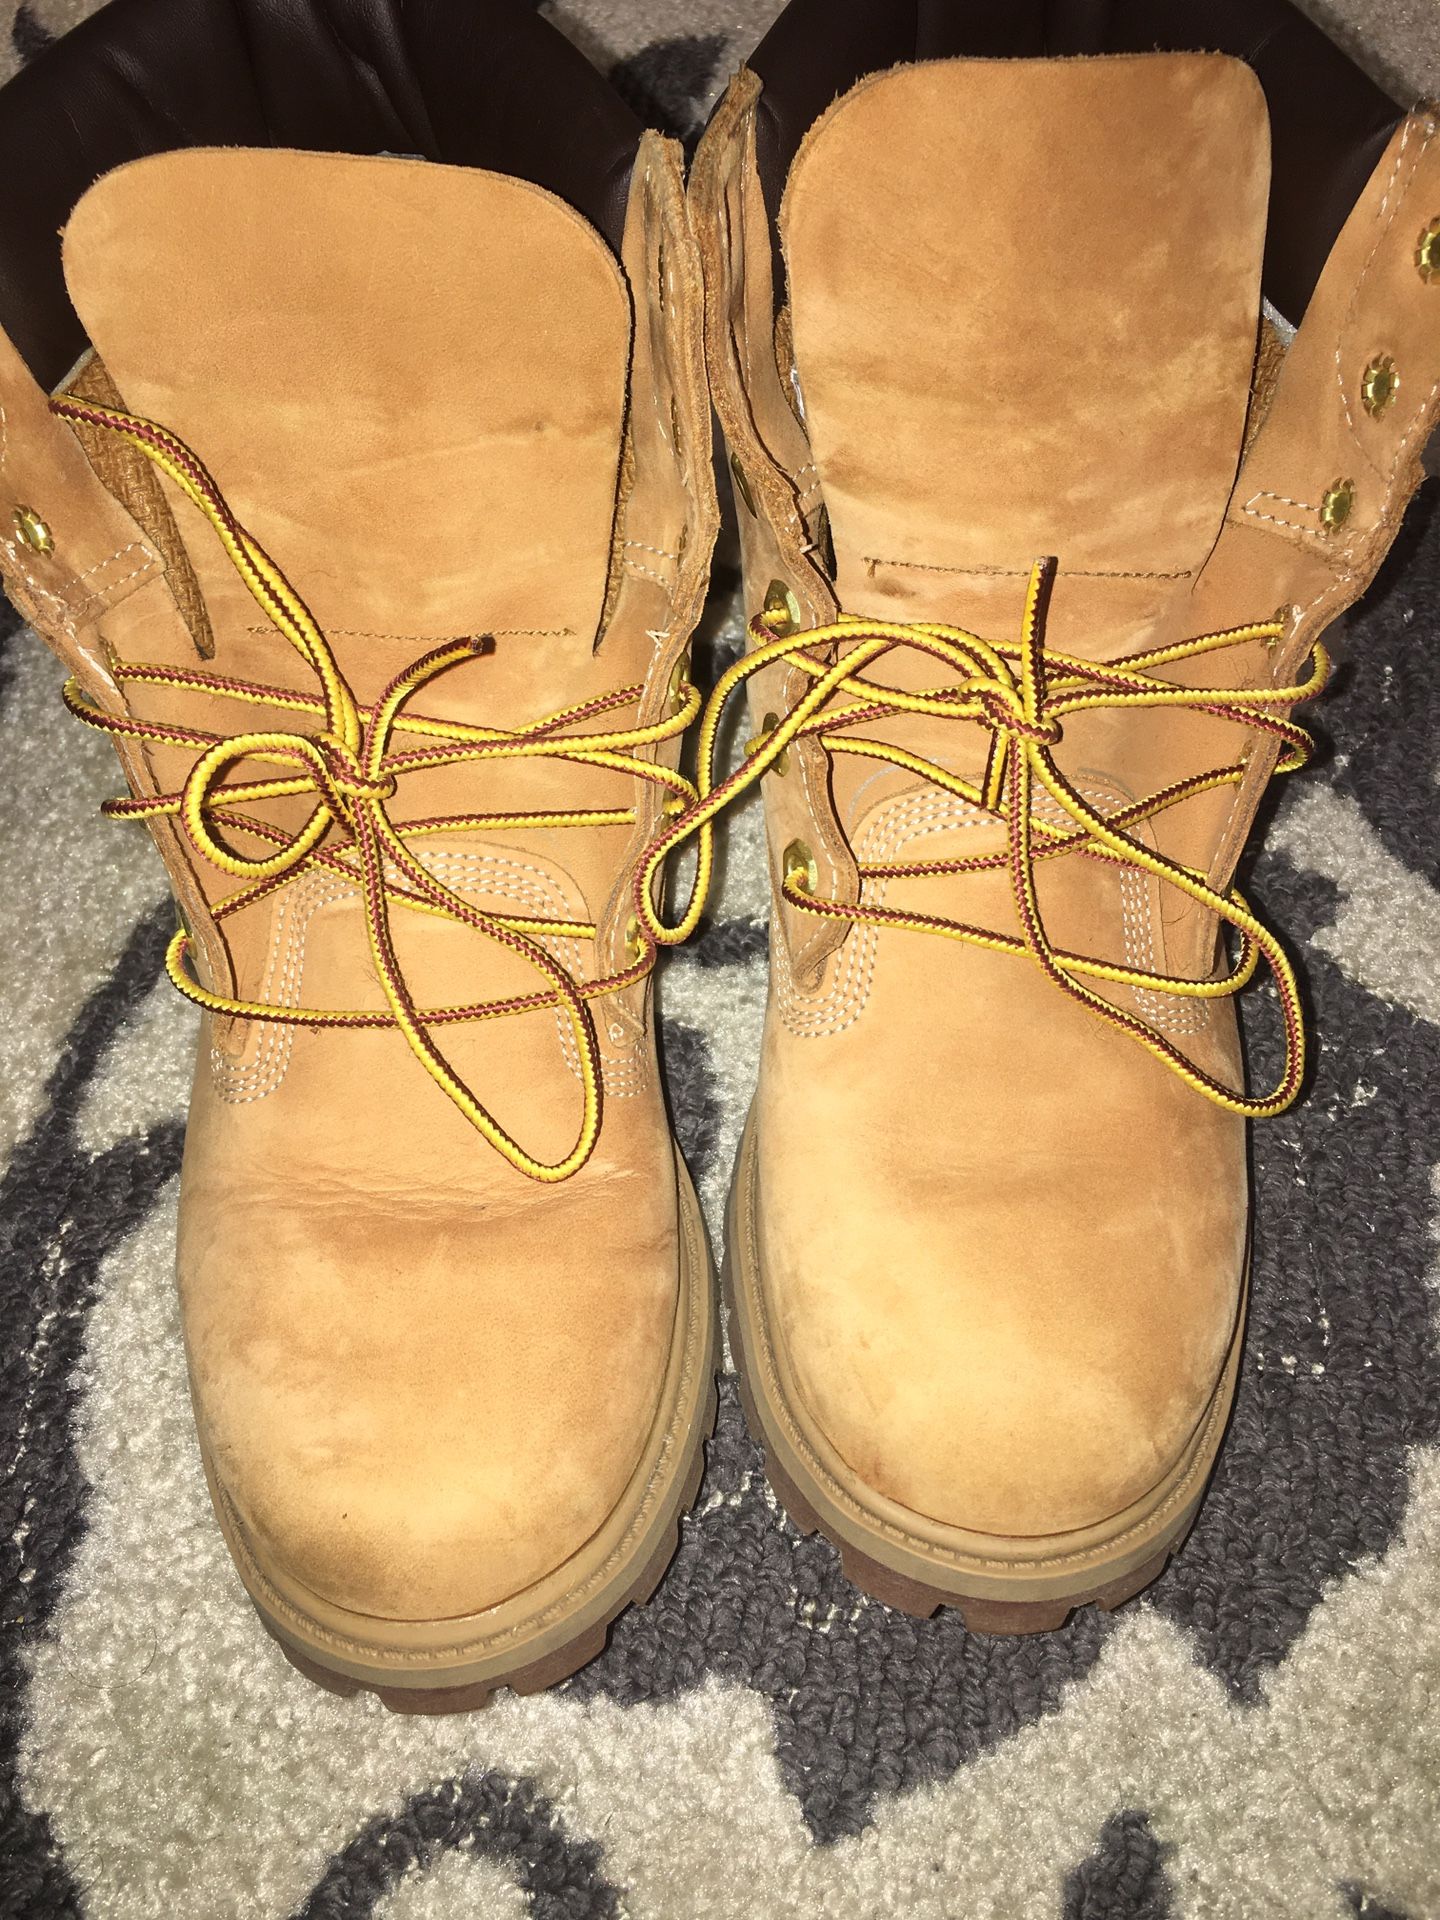 Real timberland boots $70